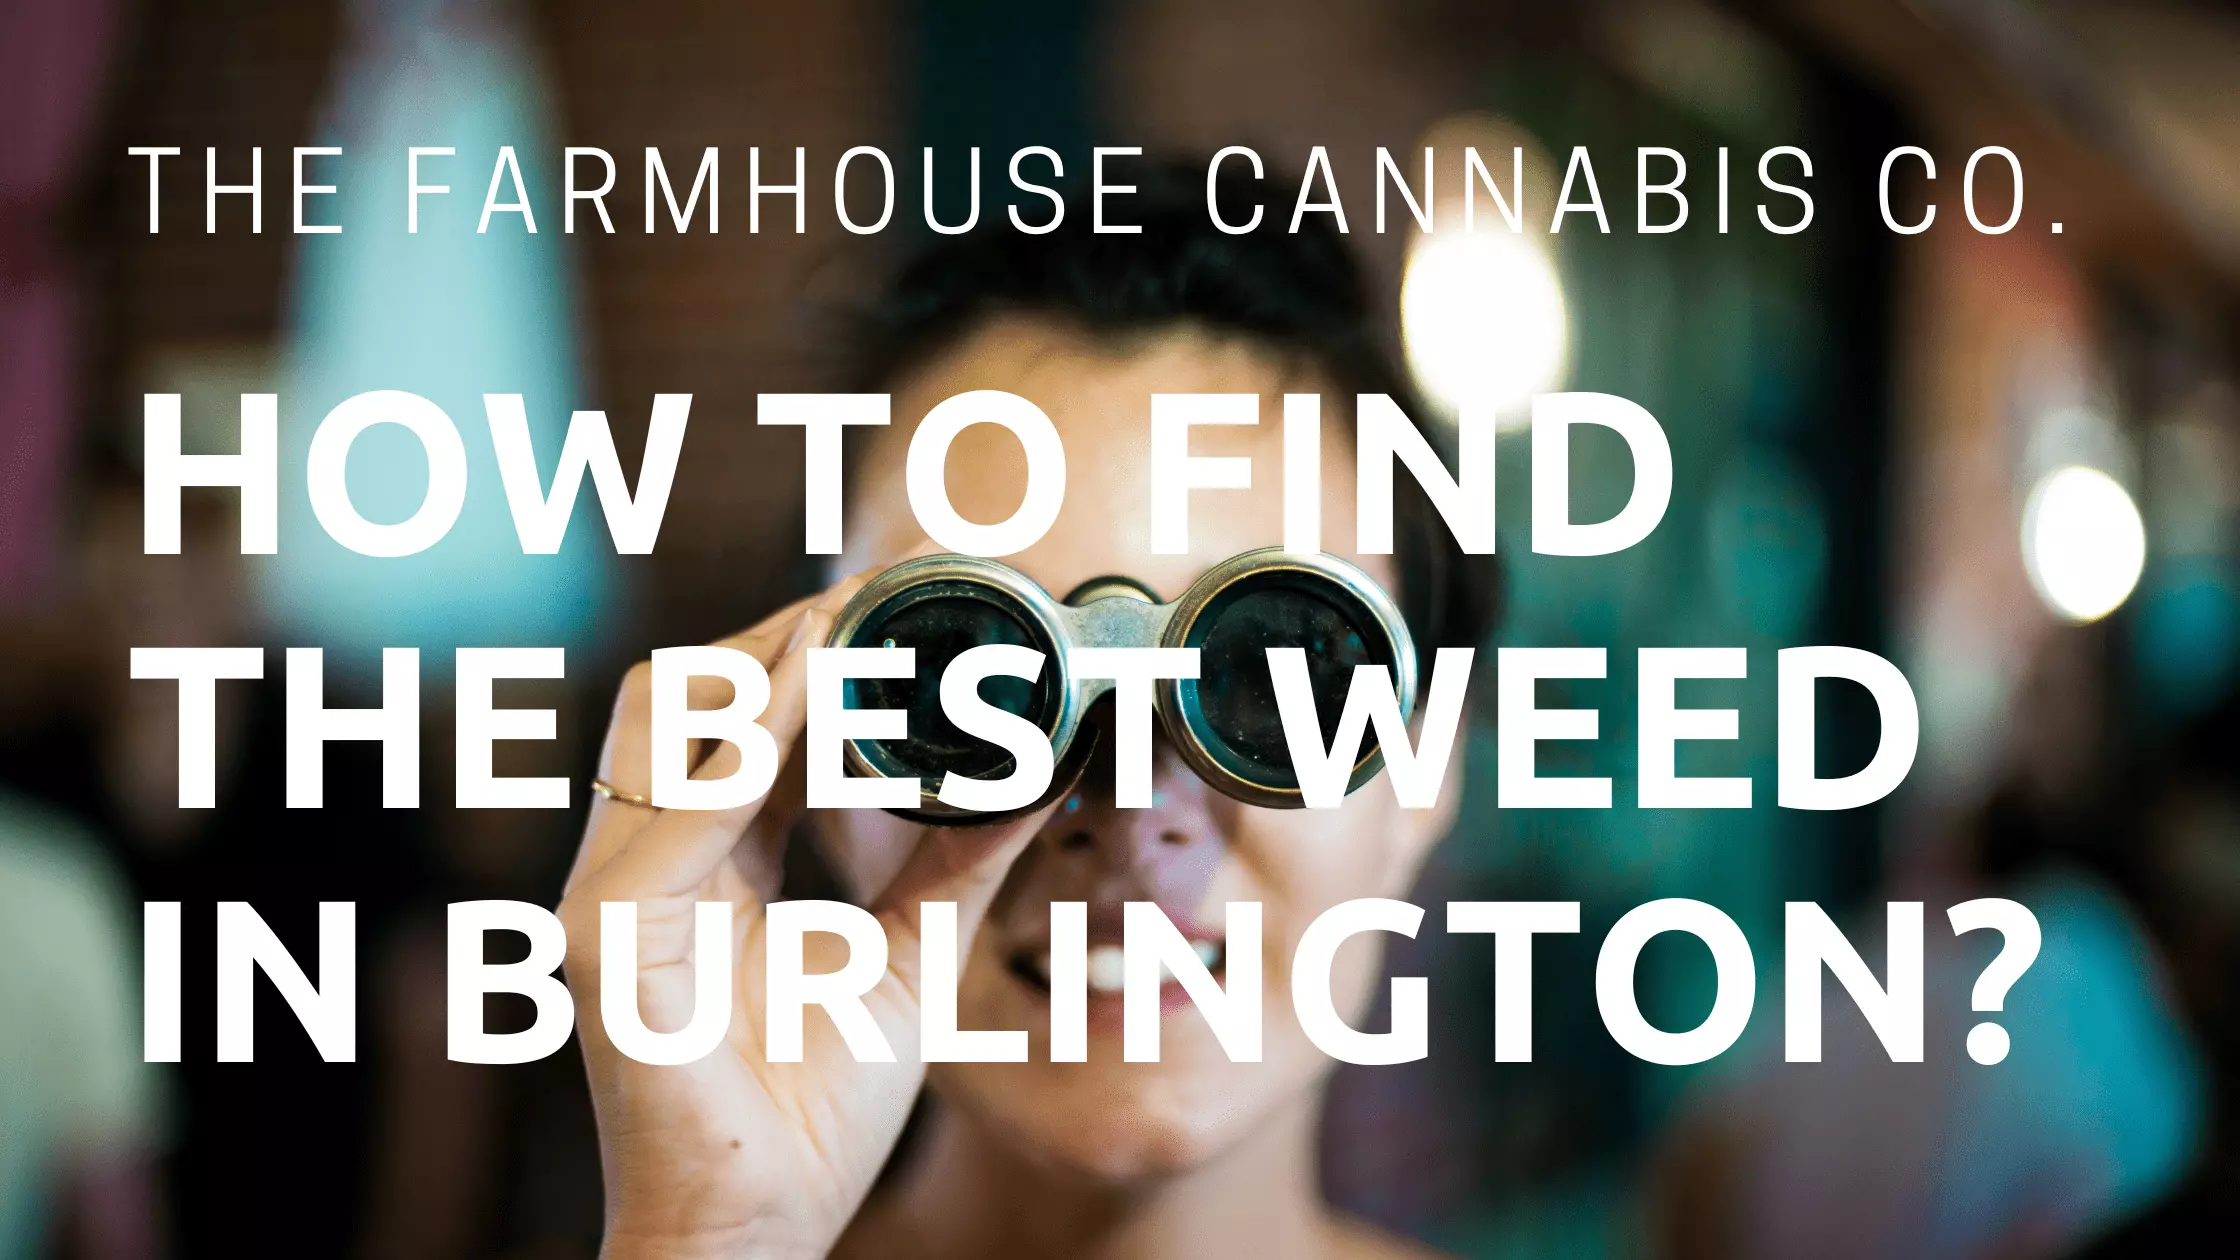 How to Find the Best Weed in Burlington? The Farmhouse Cannabis Co at 666 Appleby Line